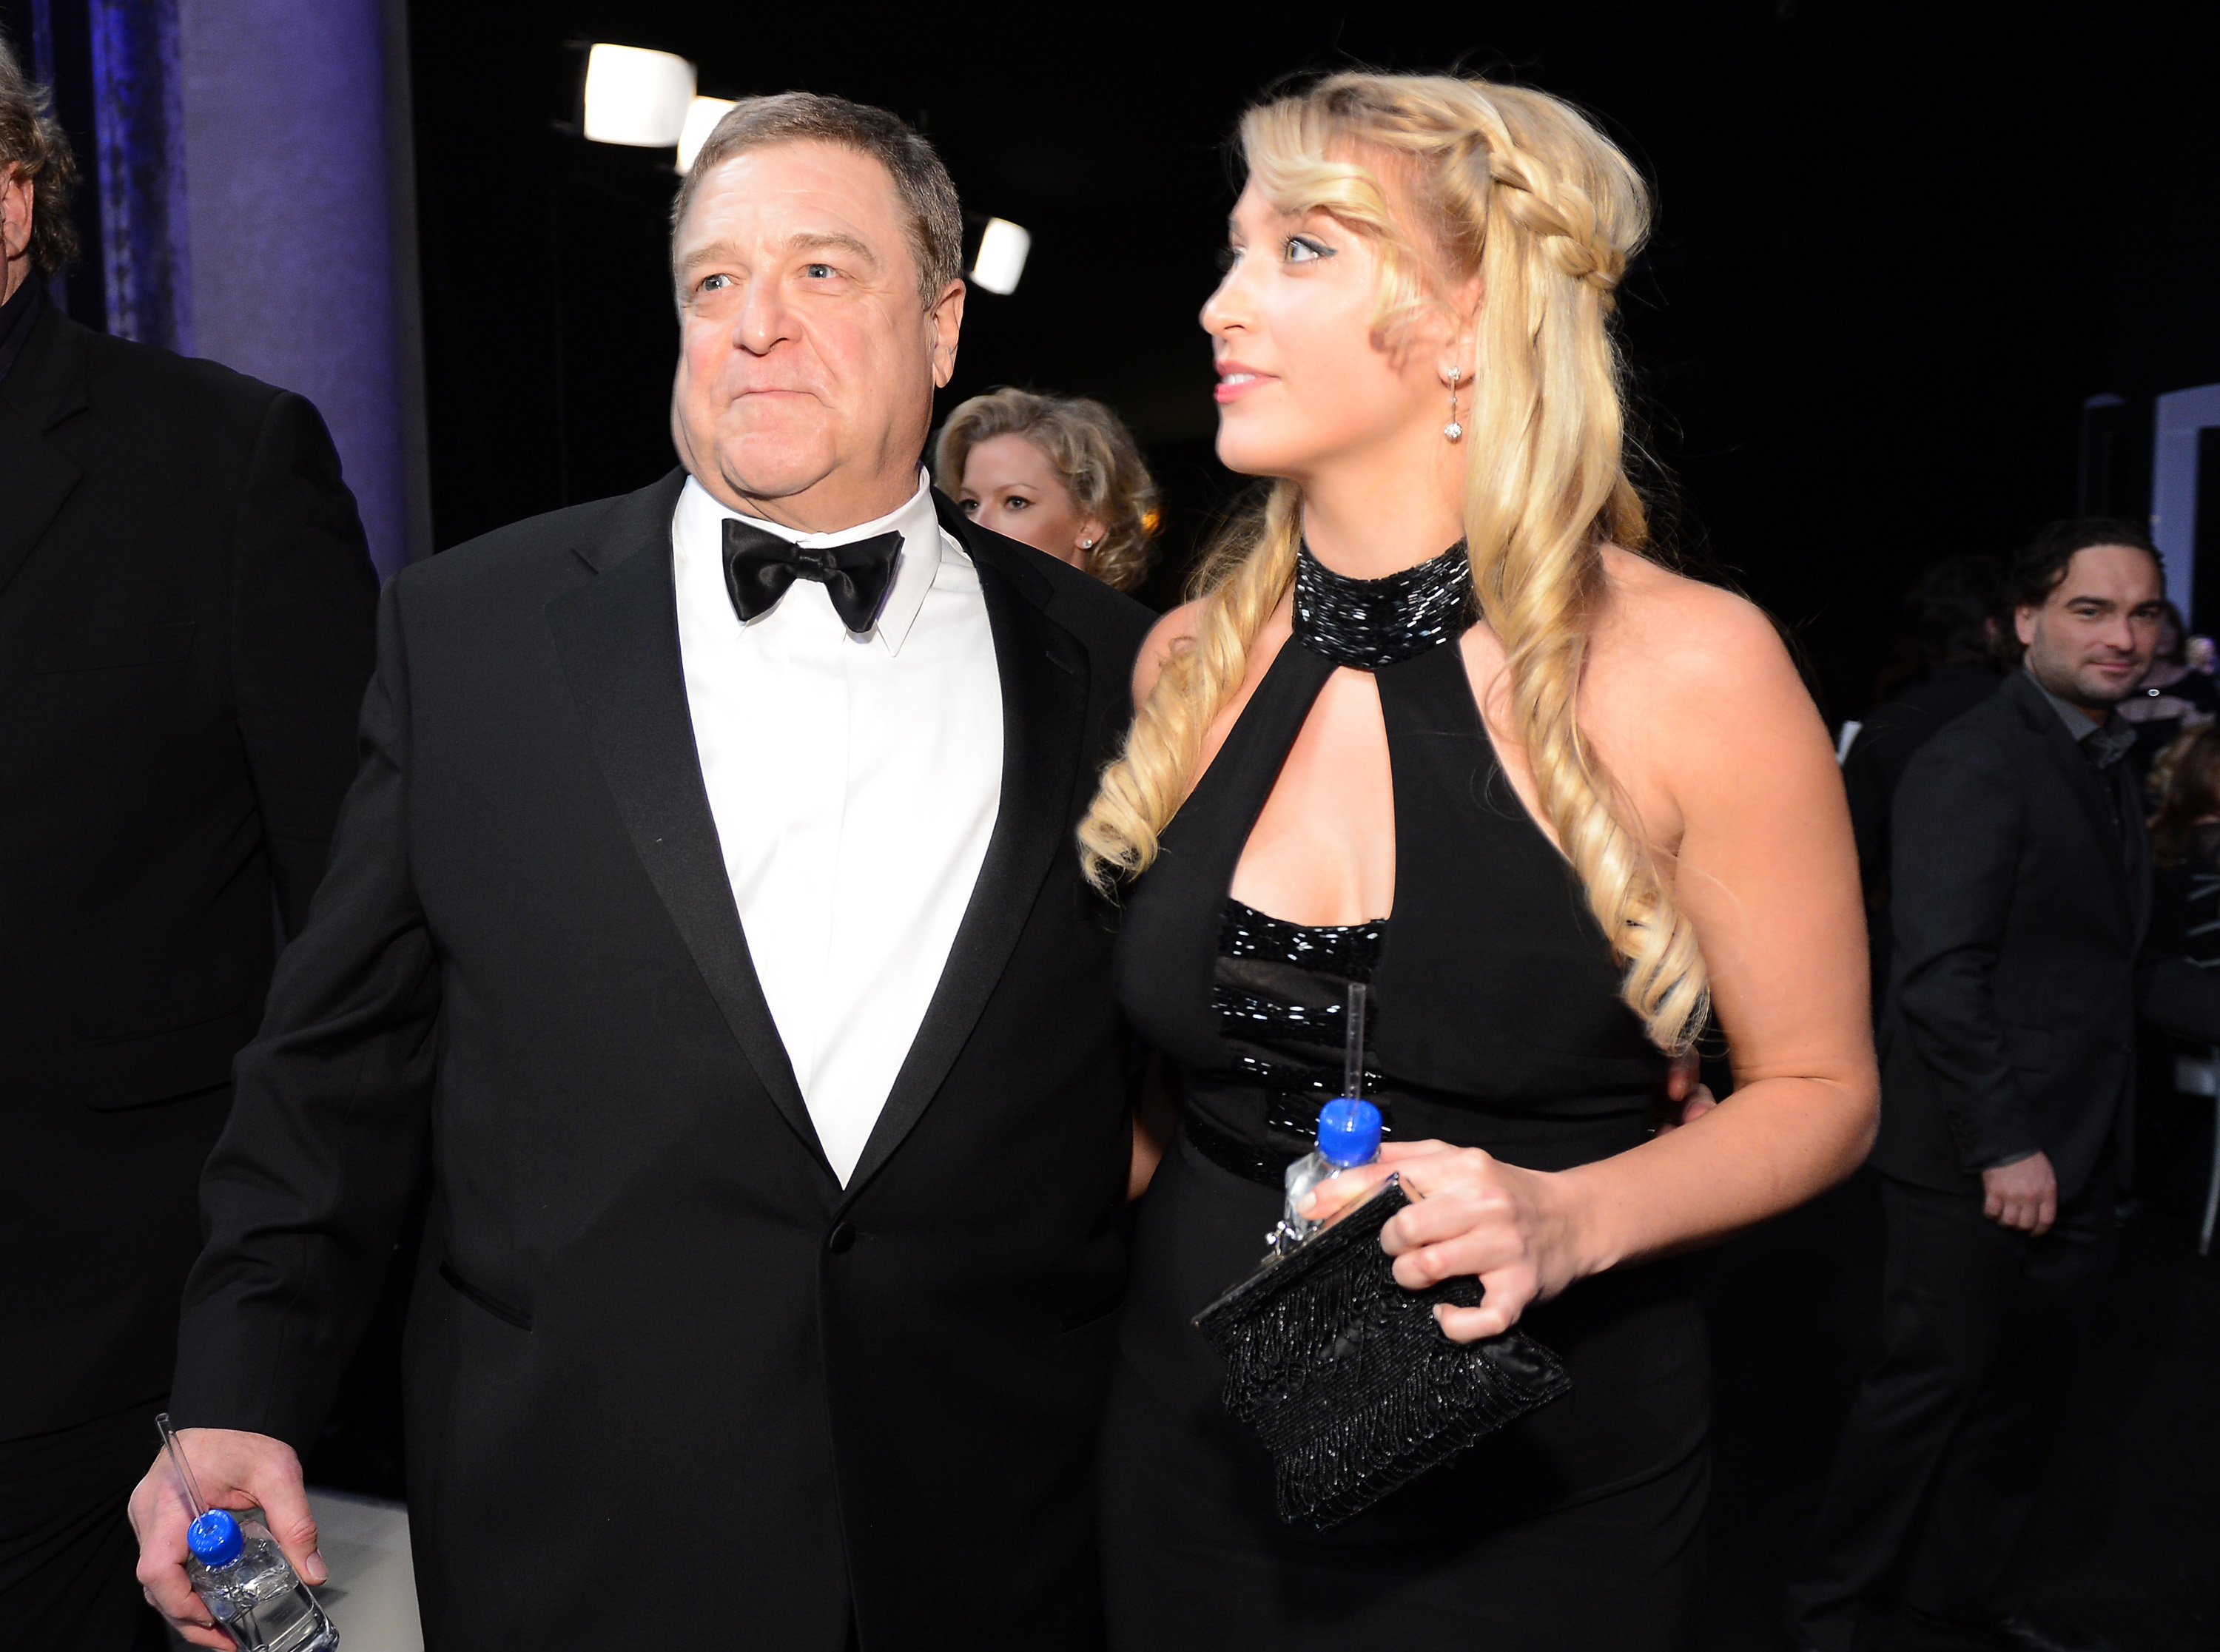 John Goodman and wife Anna Beth at Annual Screen Actors Guild Awards in California in 2013 | Source: Getty Images